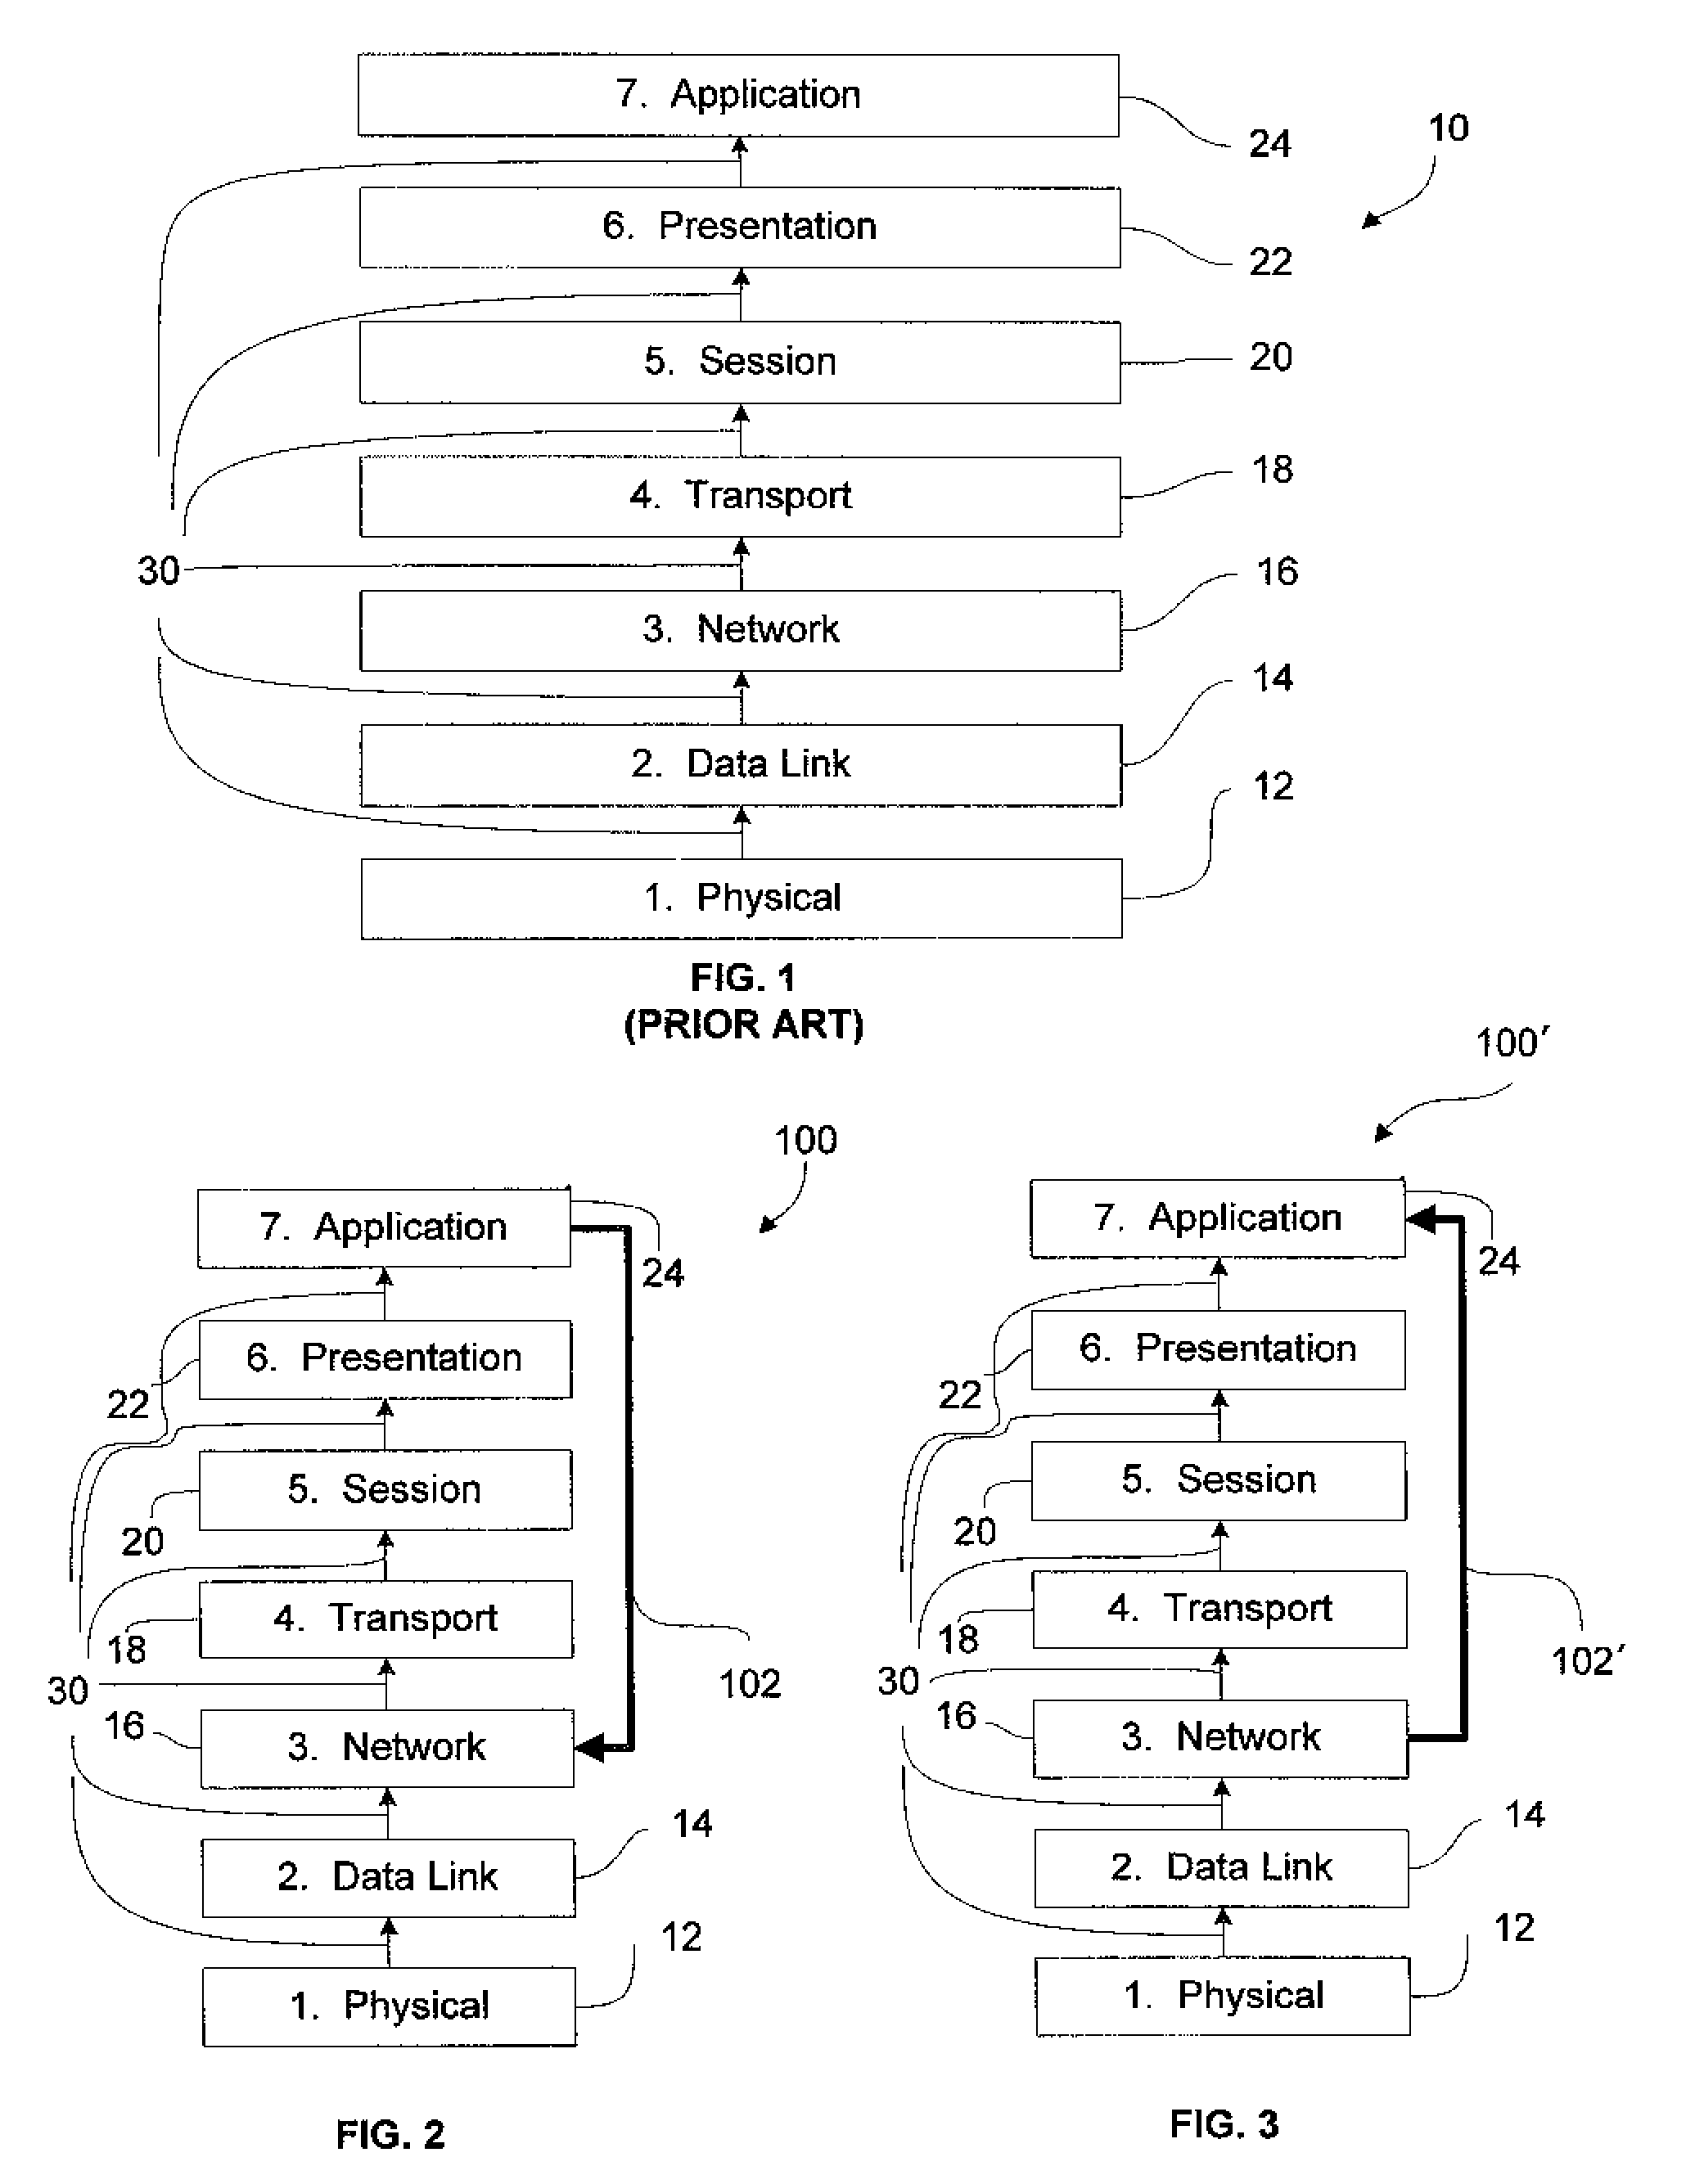 Electronic message delivery system including a network device